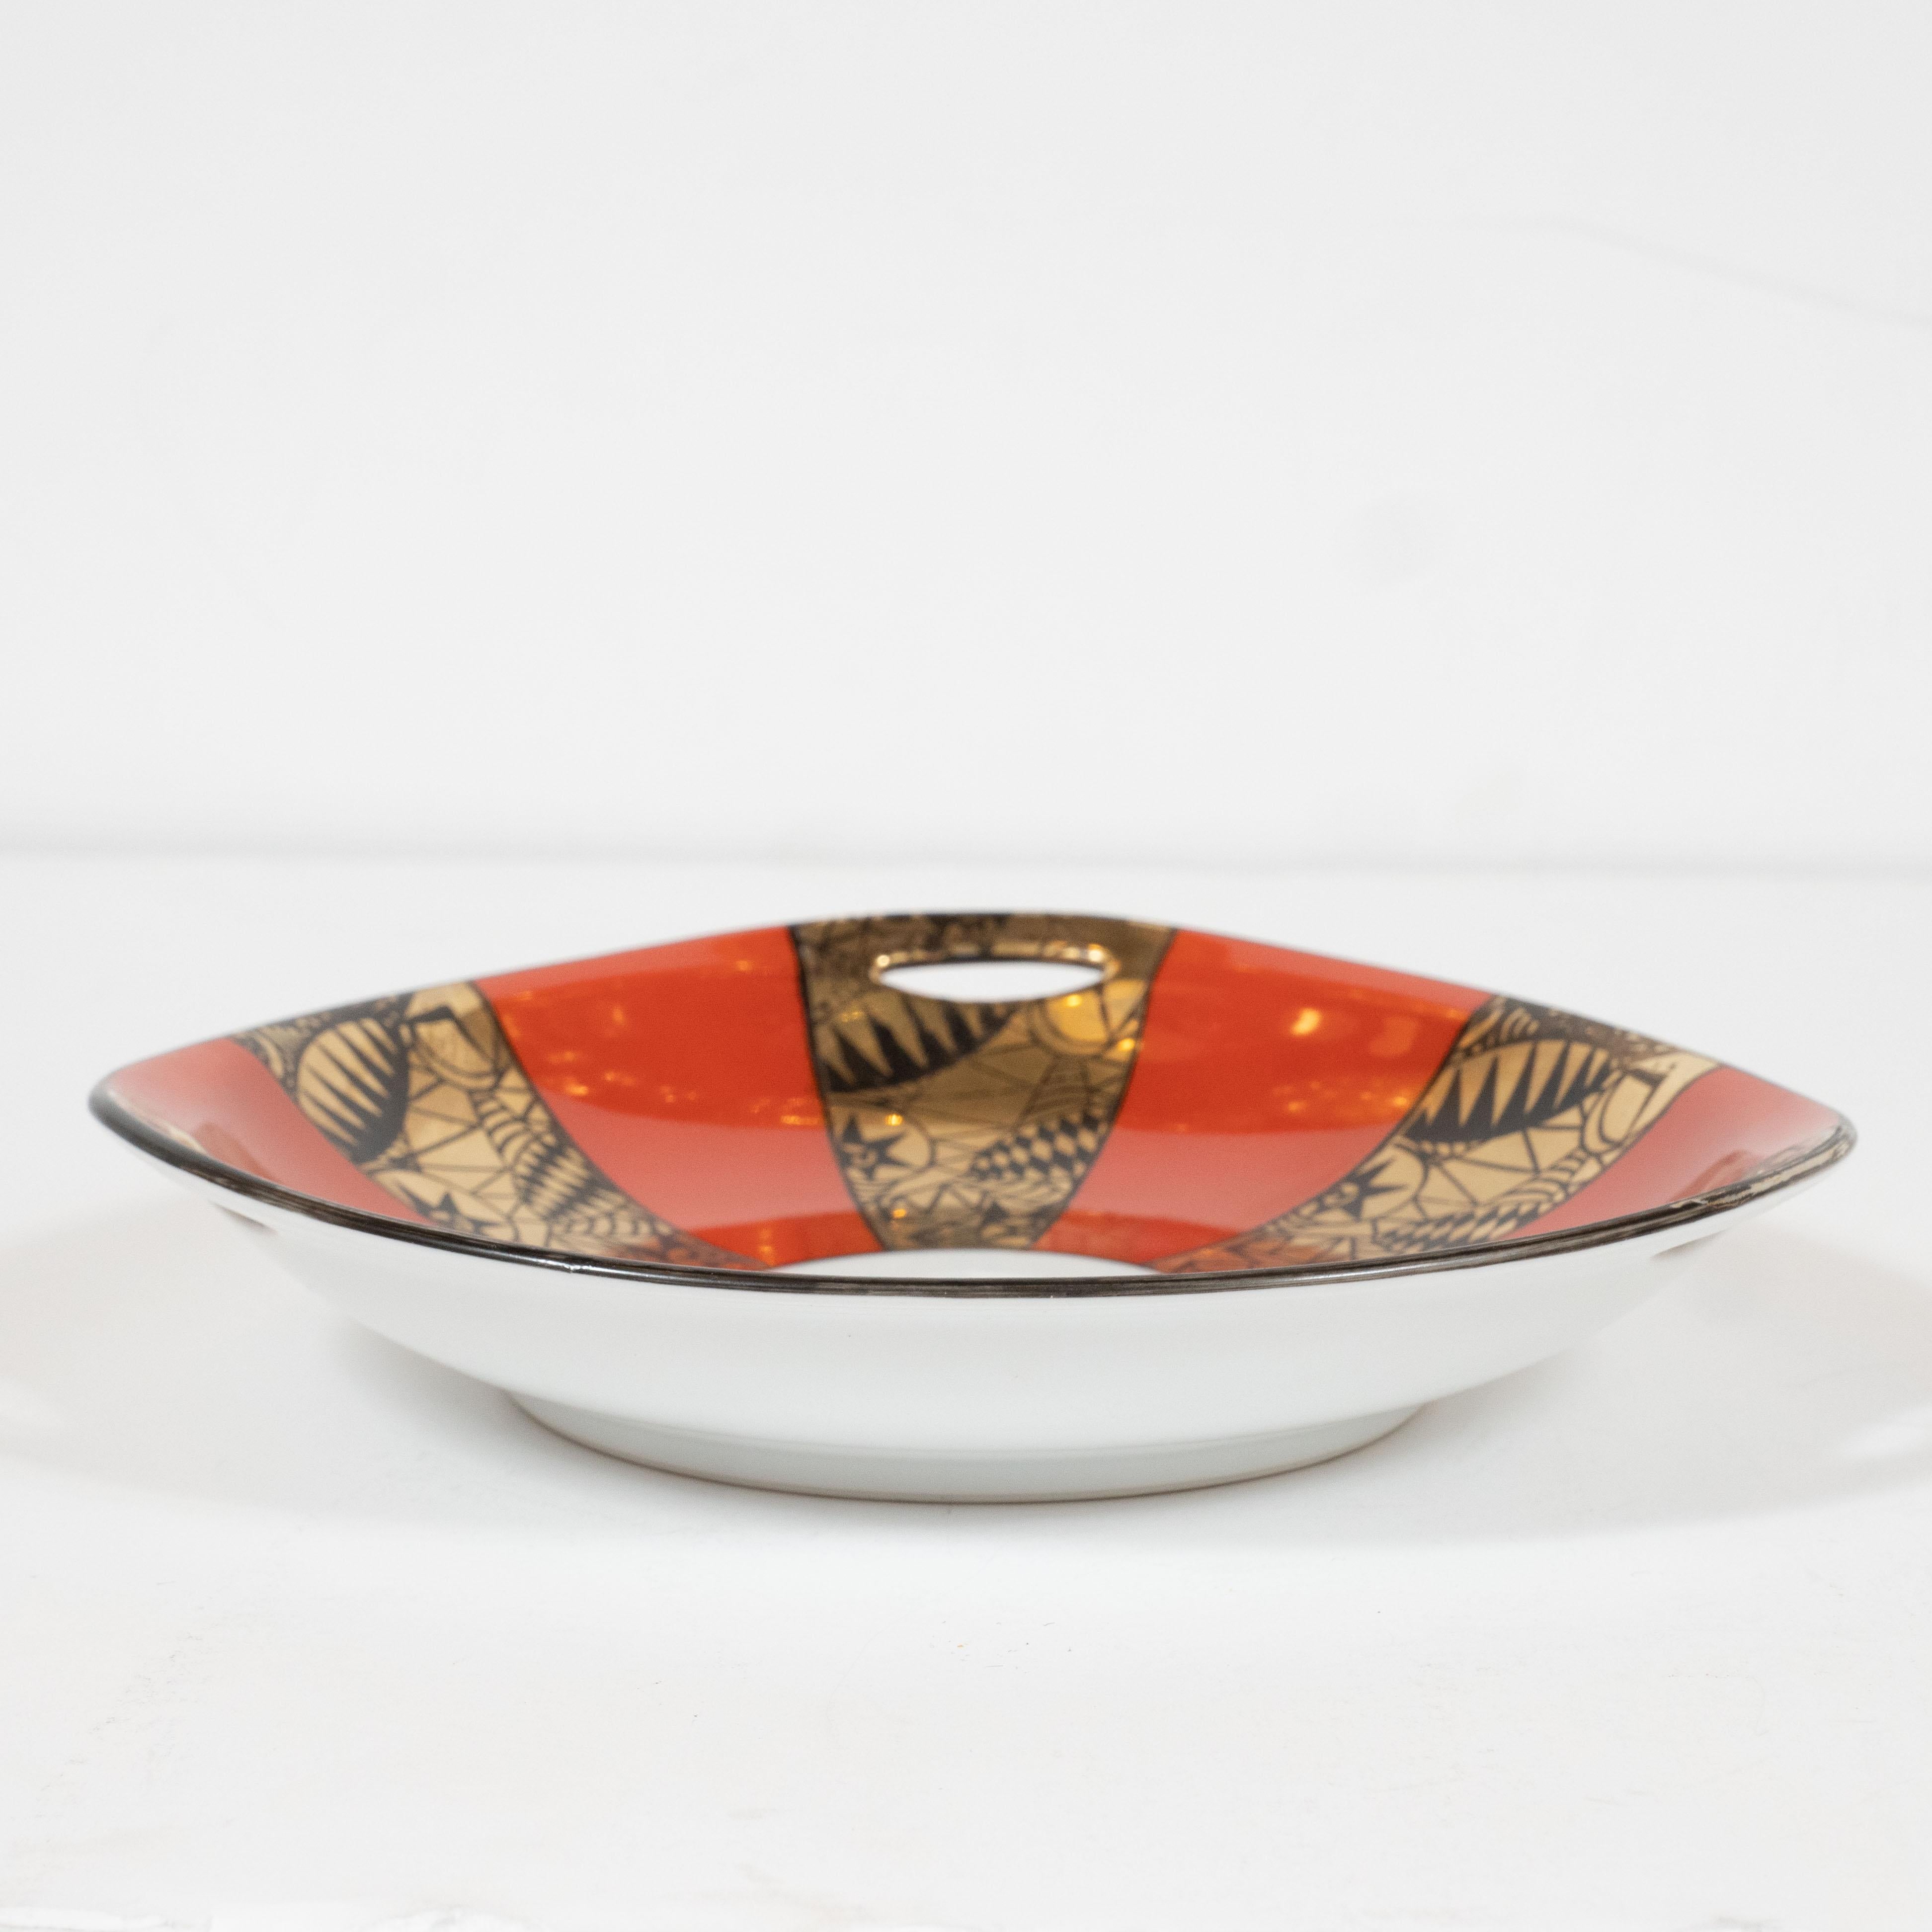 This sophisticated Mid Century Modern dish was realized by the esteemed porcelain maker Moritake in Japan, circa 1930. It features an amorphic form- a slightly irregular circular shape- with a sunburst pattern emanating from a white center. The